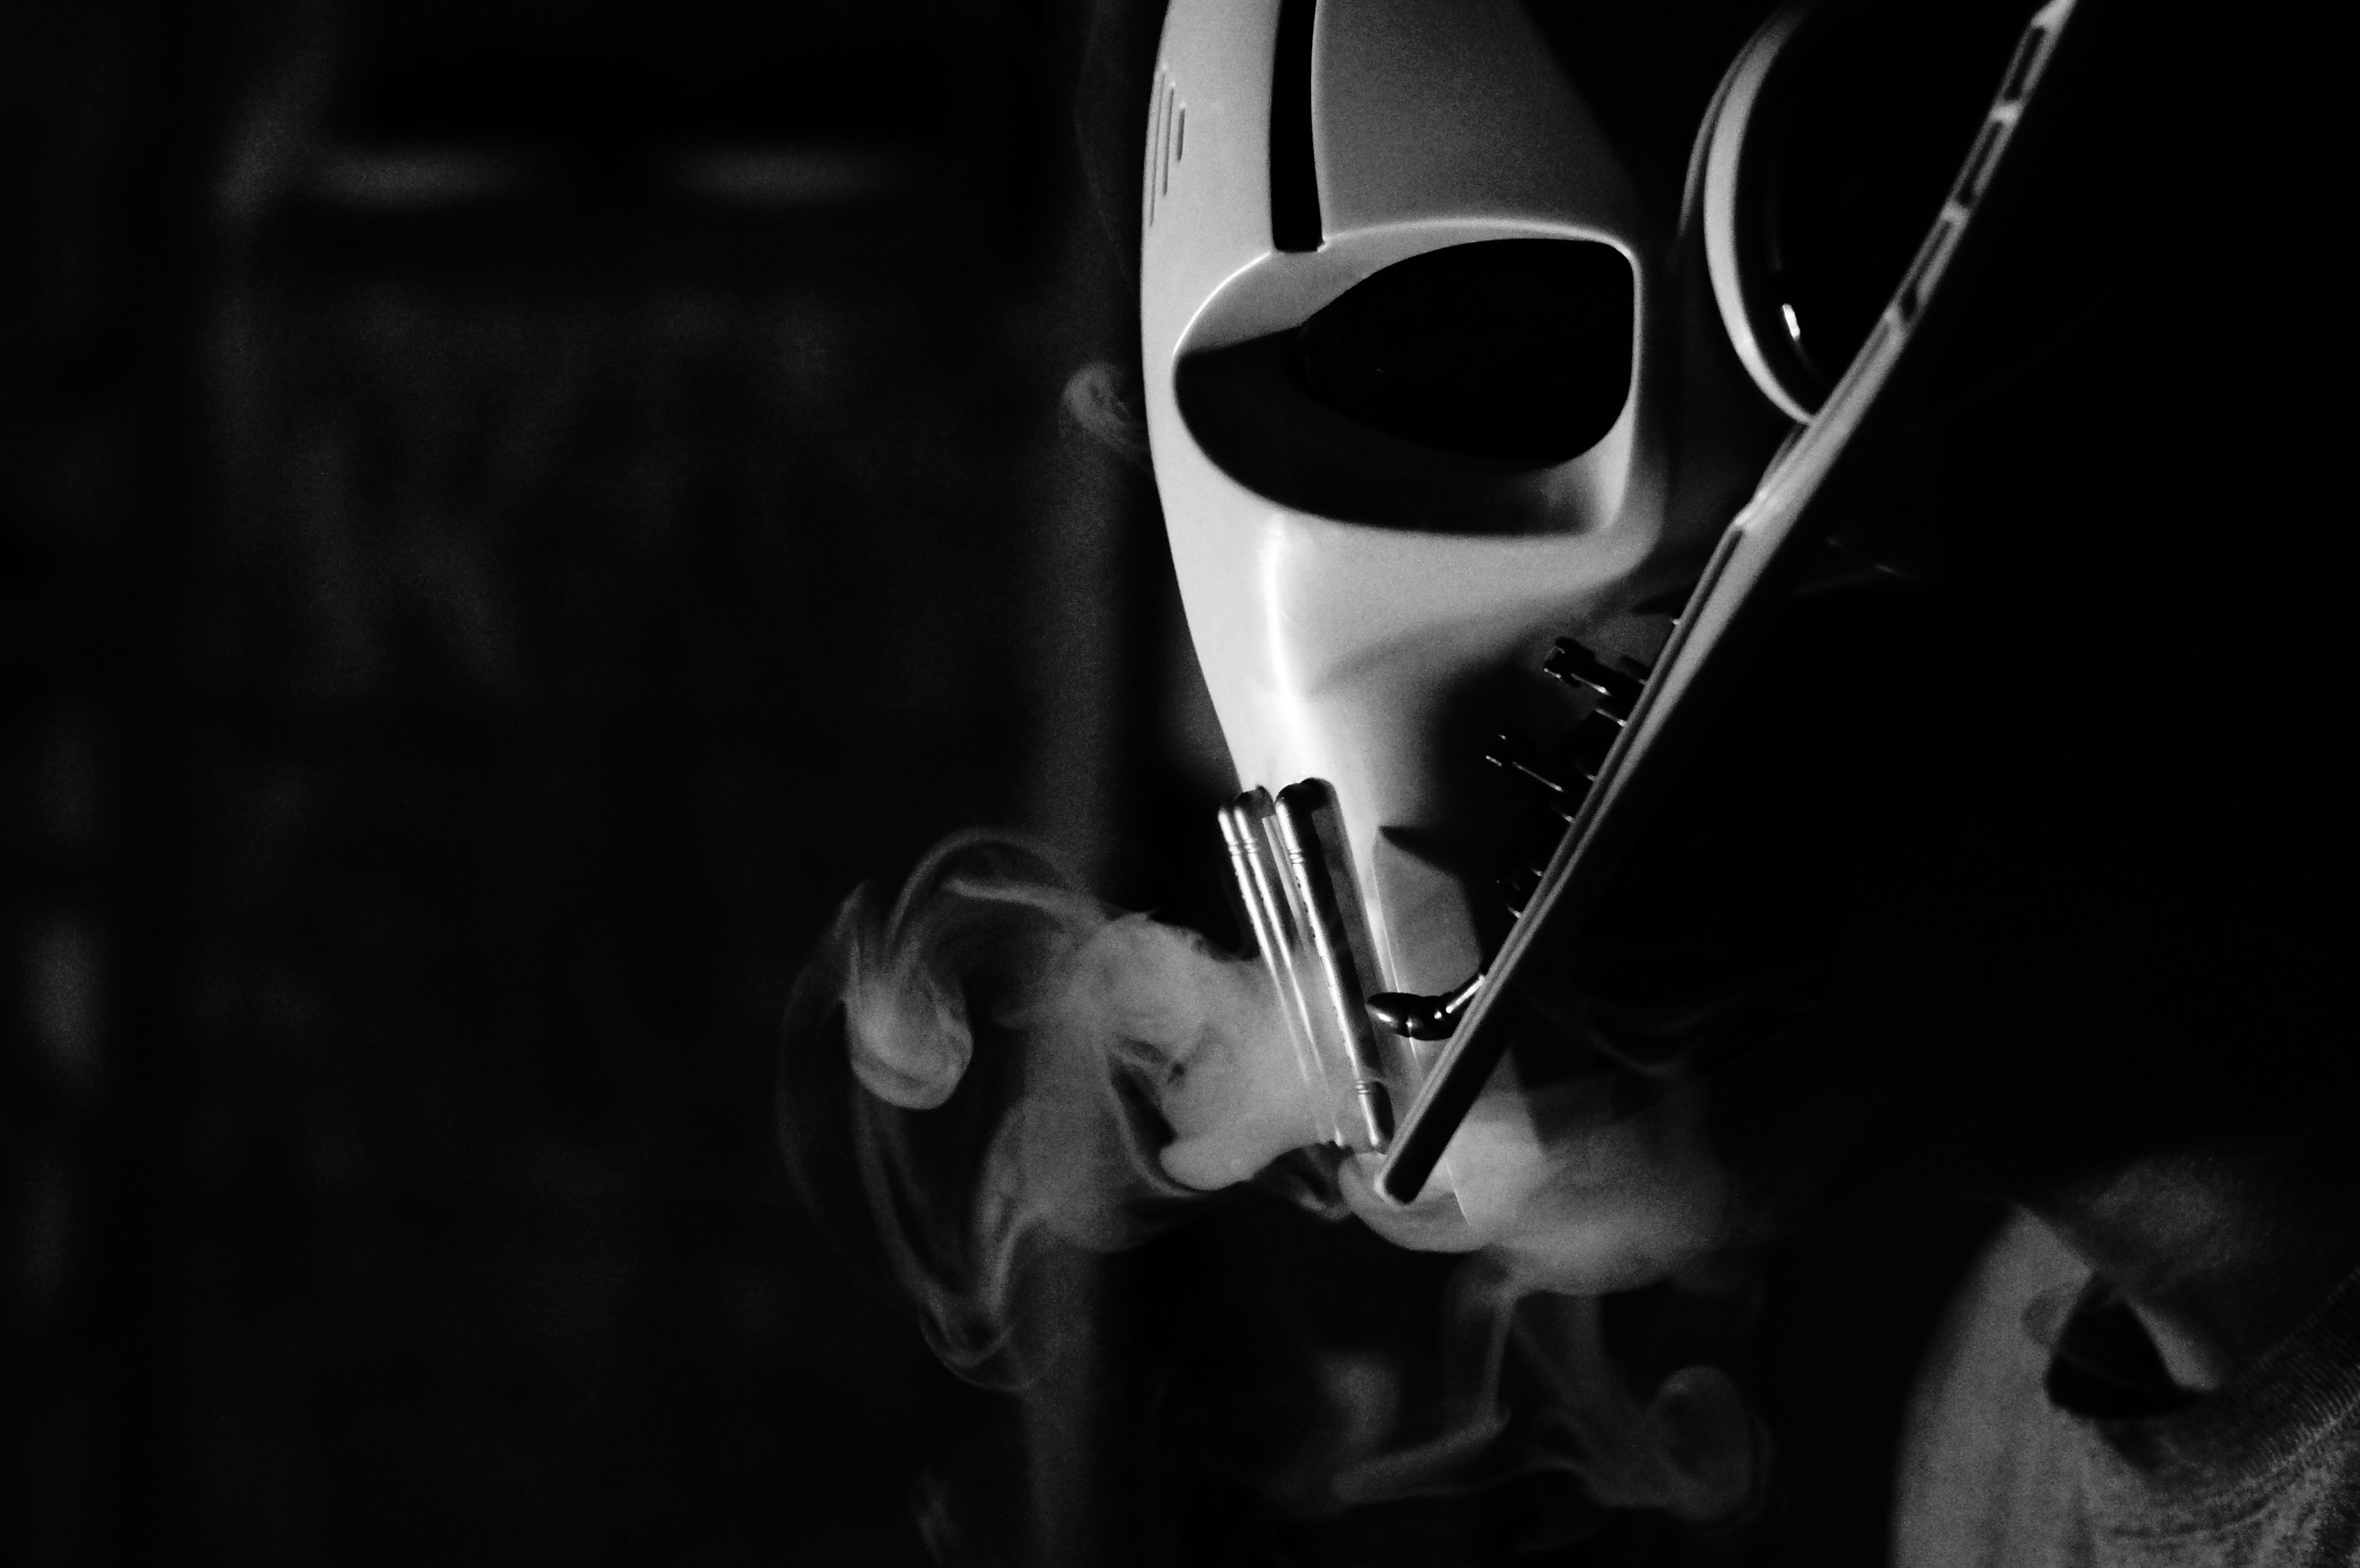 General Grievous Gas Mask I Saw In R Trees A While Back Wallpaper